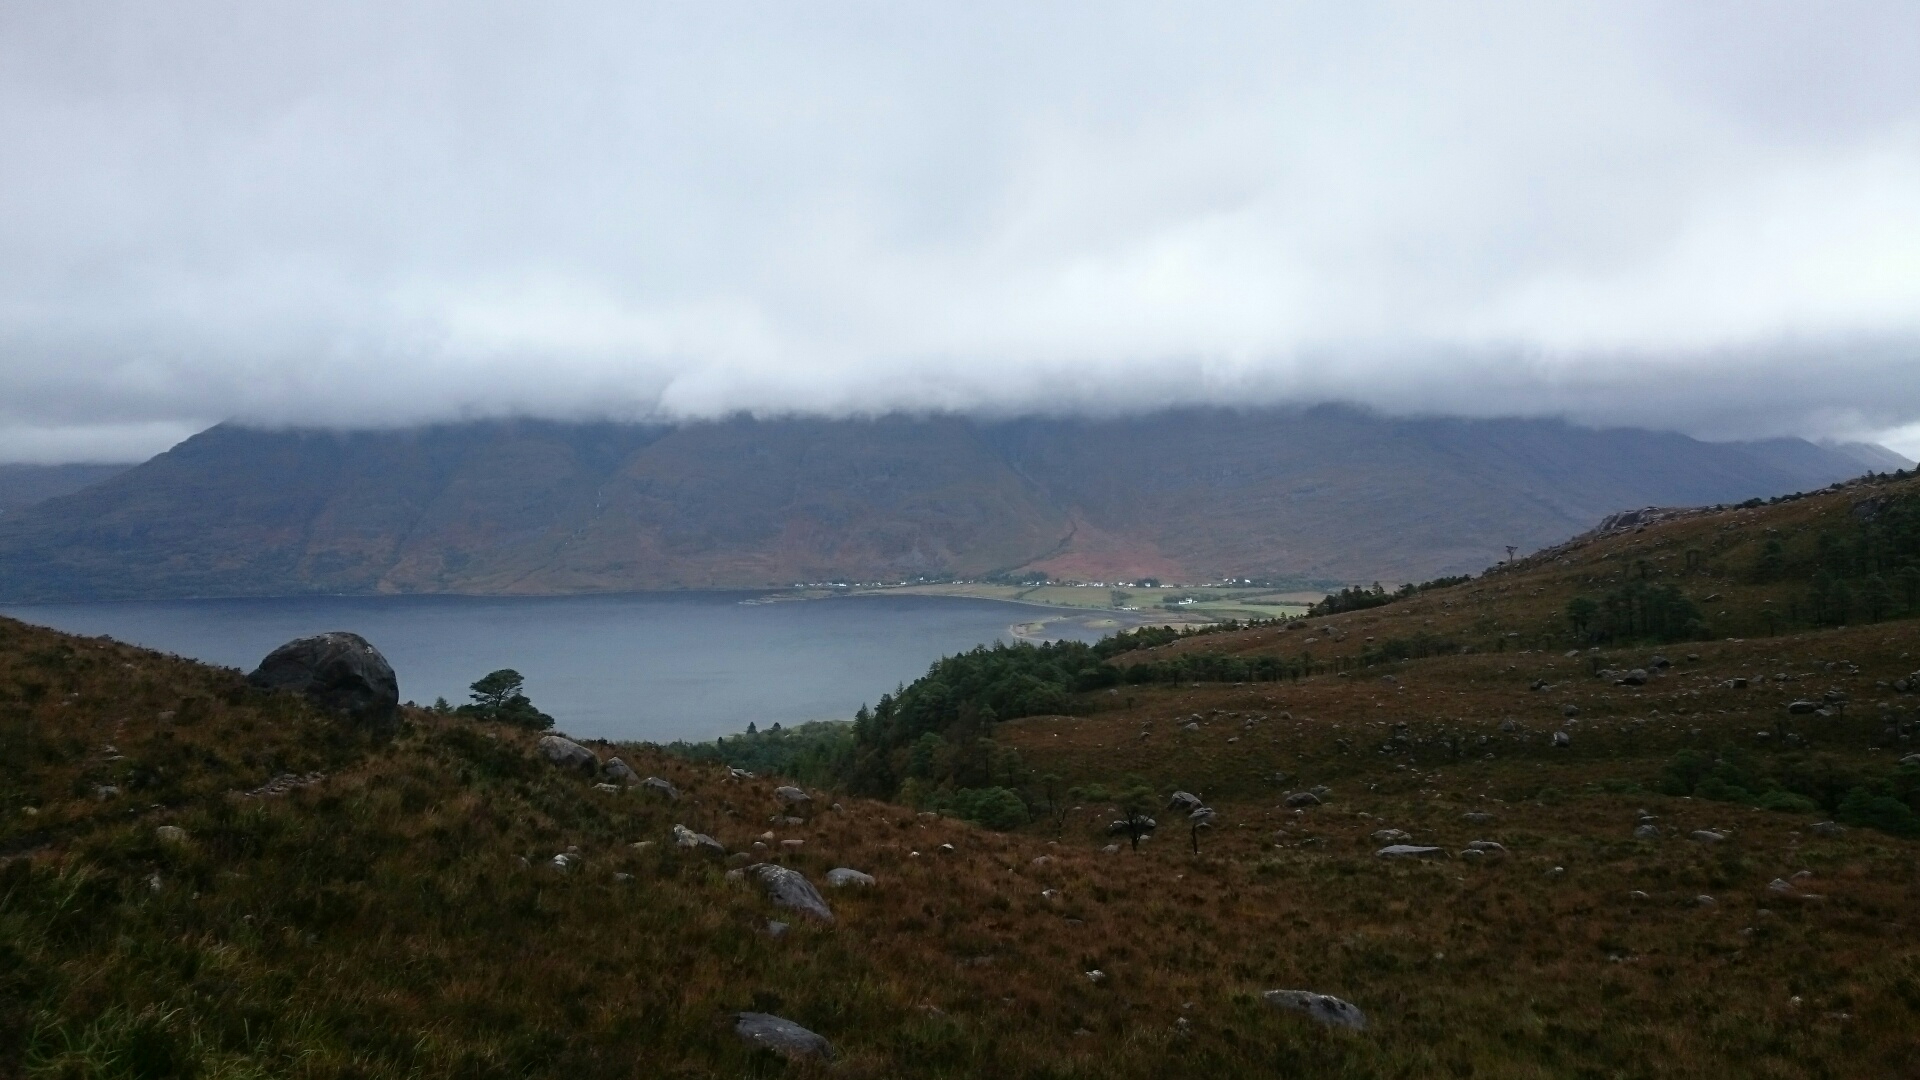 Day 10 - Torridon and the surrounding area